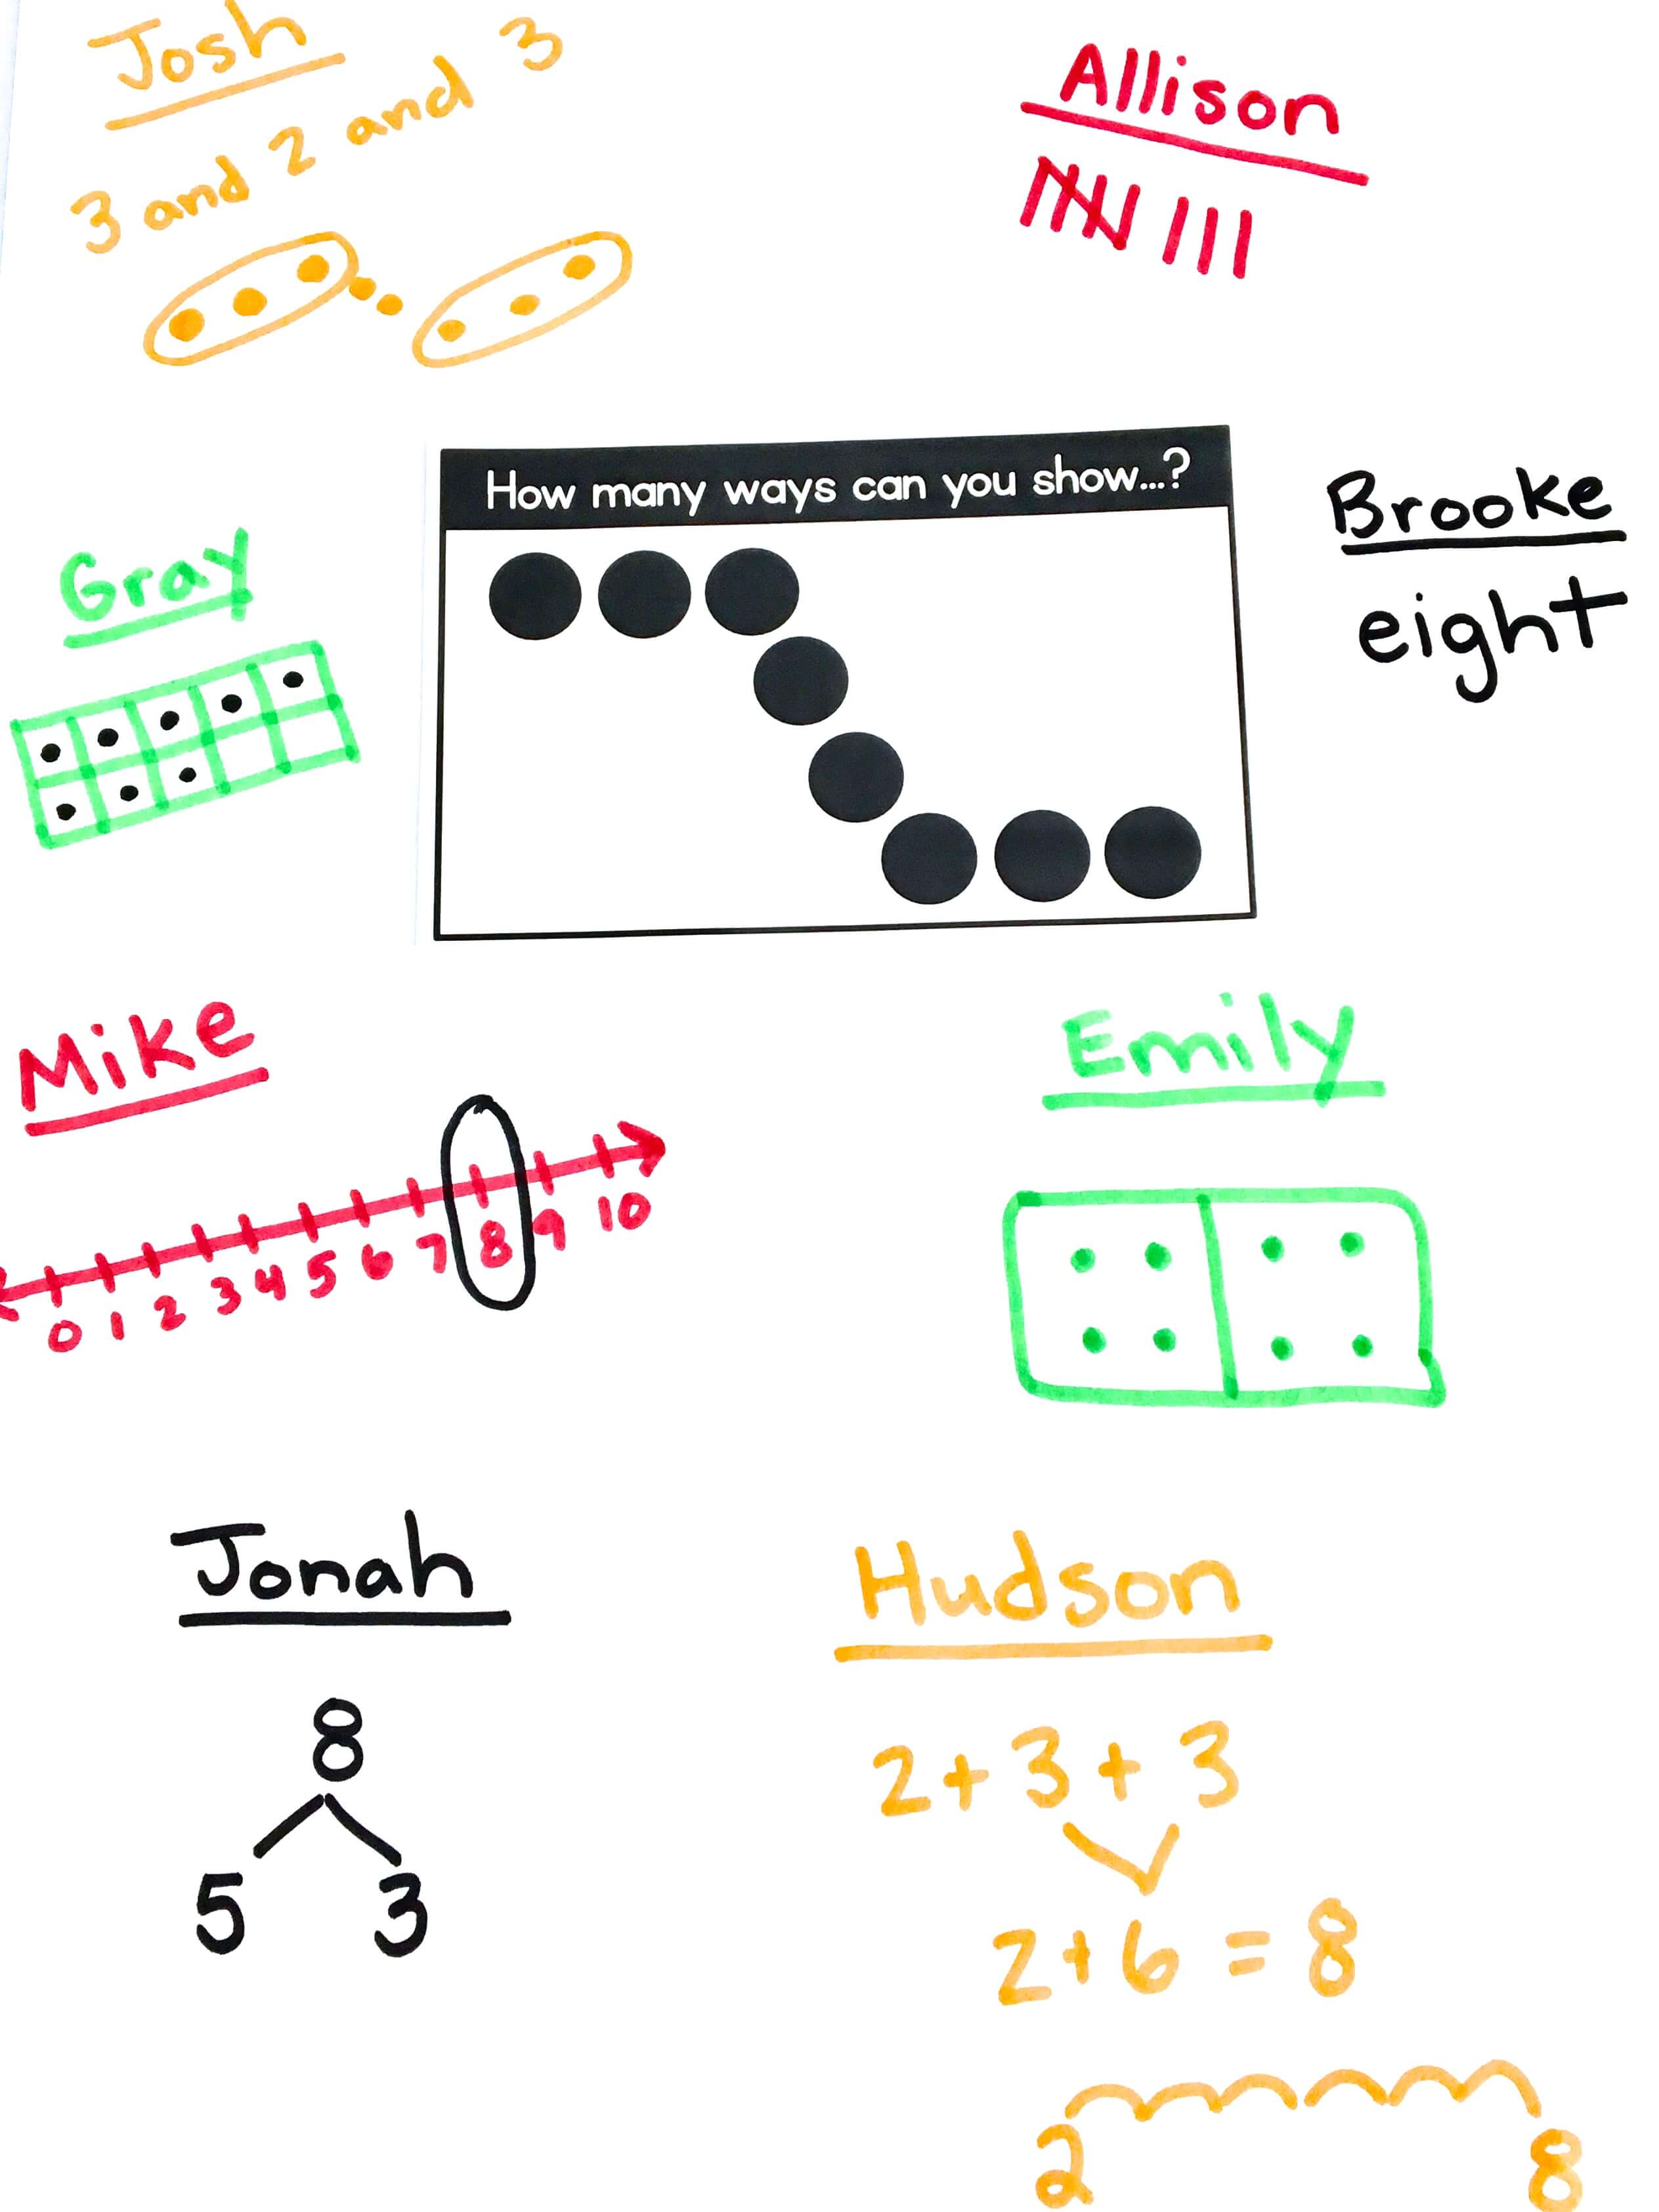 Number Talks can be built into your daily schedule as short, daily exercises aimed at building number sense and flexibility in number thinking. 